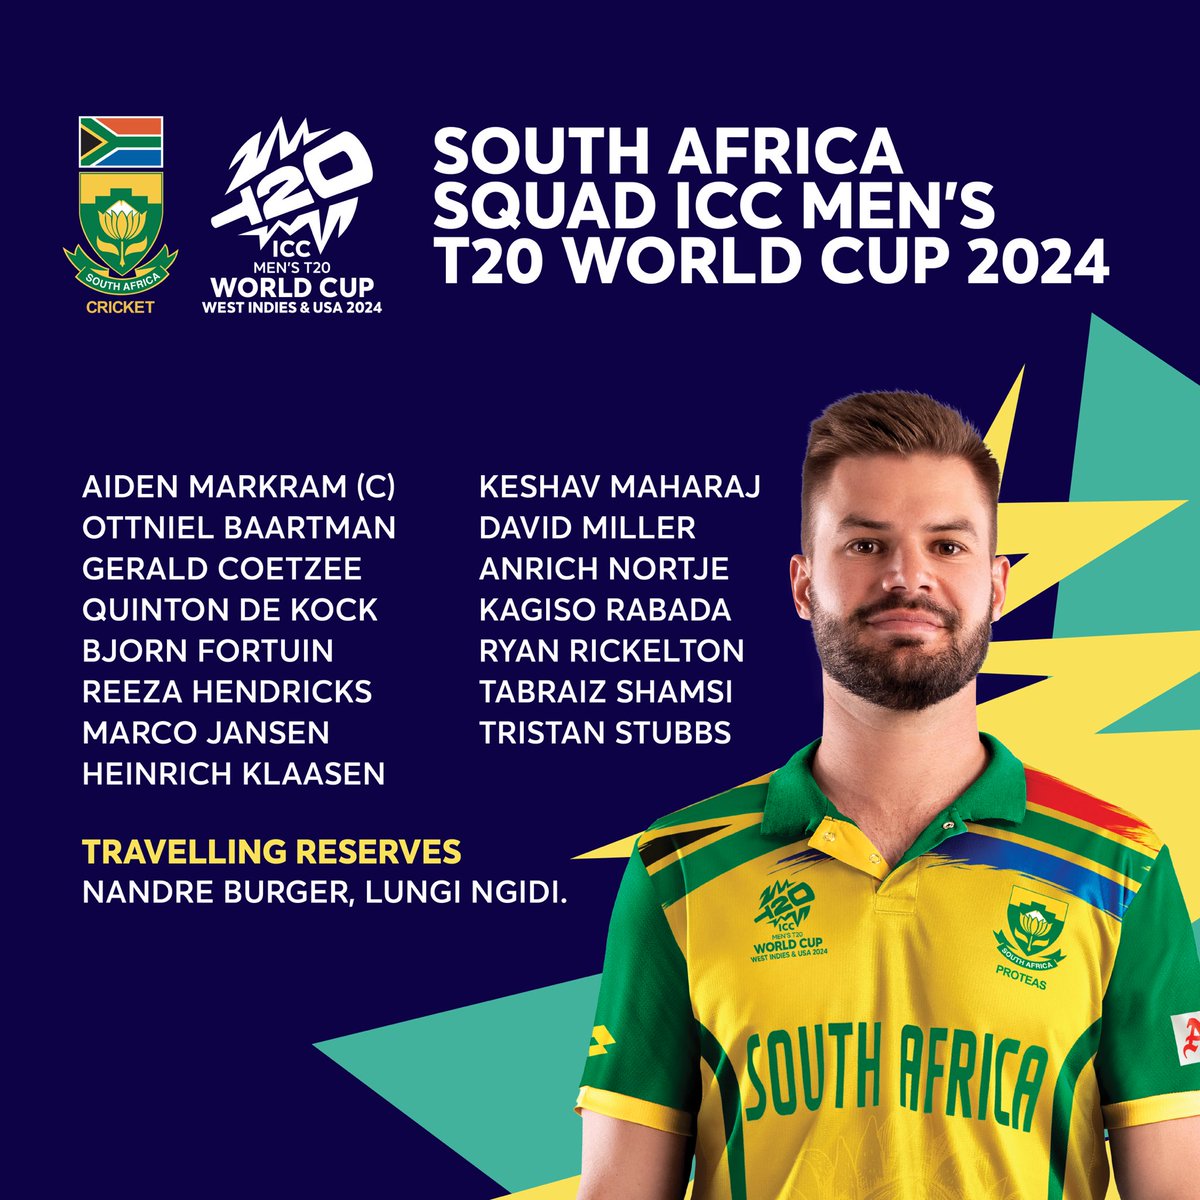 Proteas squad for #T20WorldCup24!🏏🏆♥️🔥

@ProteasMenCSA #Proteas #ProteaFire #CSA #SouthAfrica #WestIndies #USA #T20WC2024 #T20WorldCupSquad